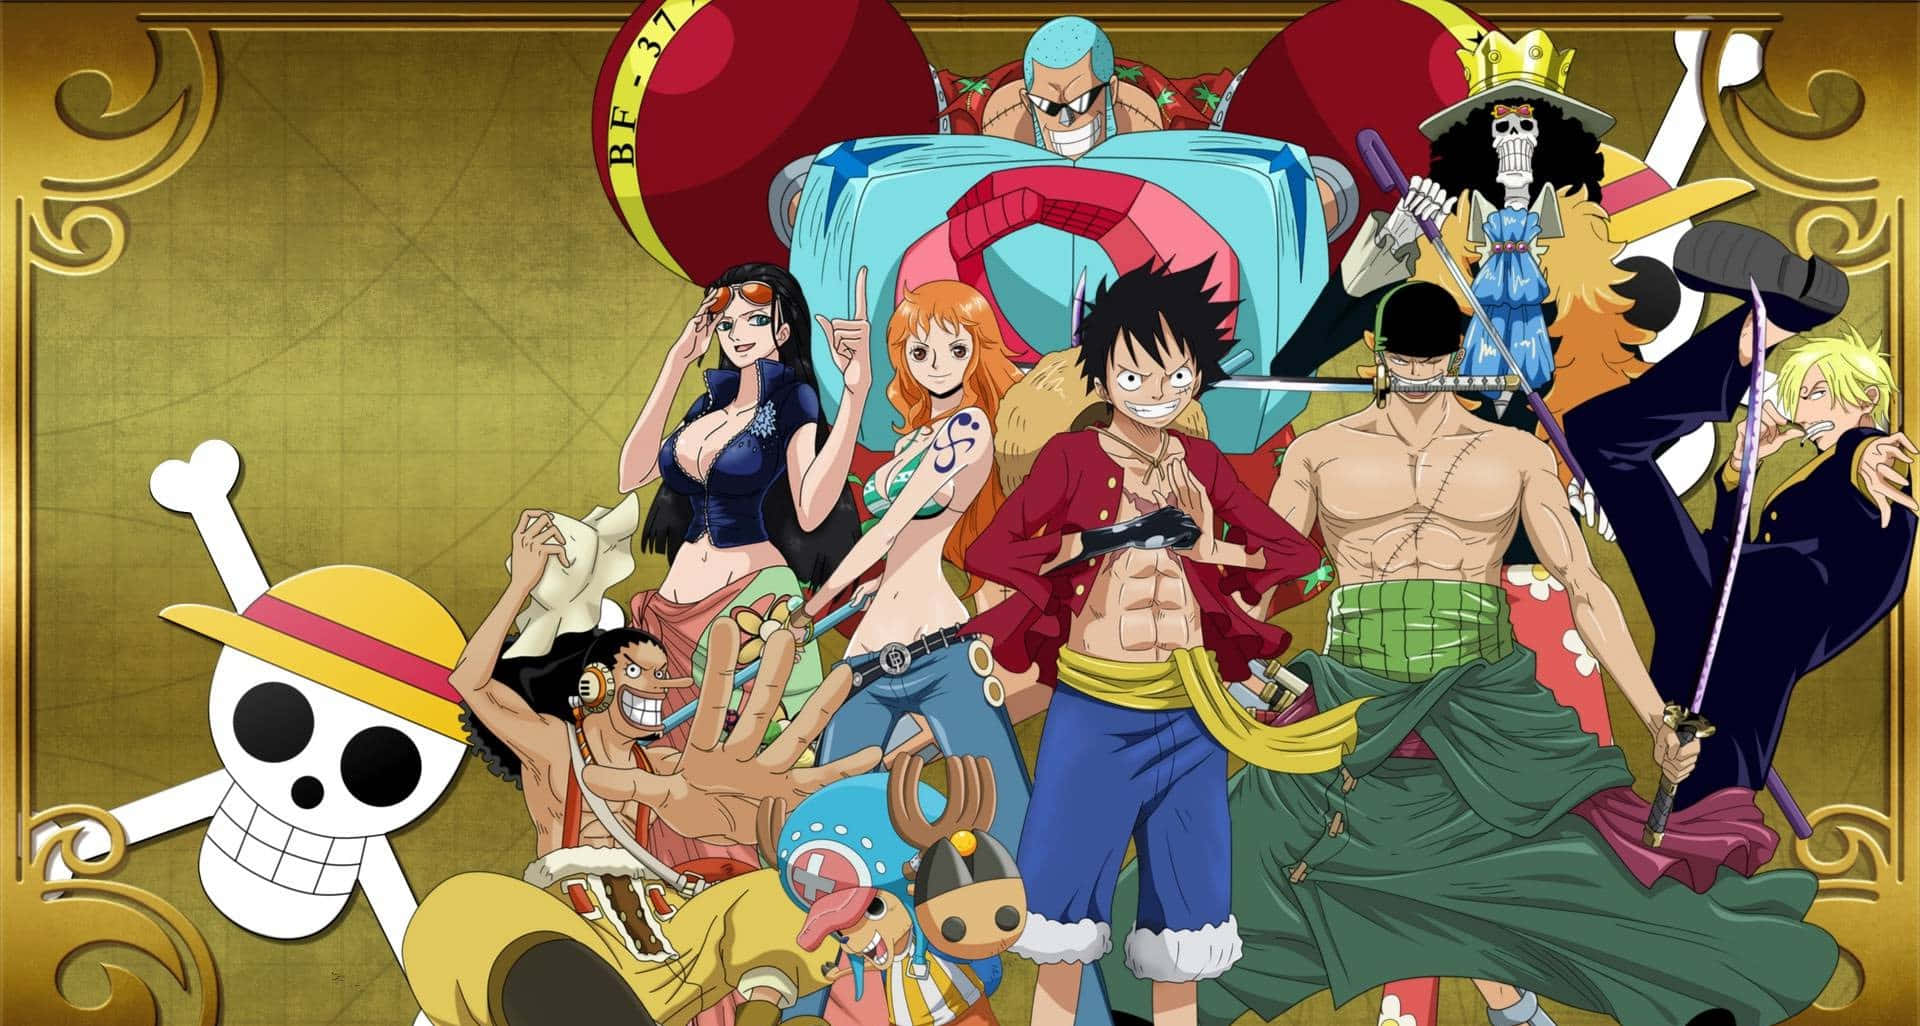 ____  Welcome to Dressrosa, a place full of adventure and surprises! Wallpaper